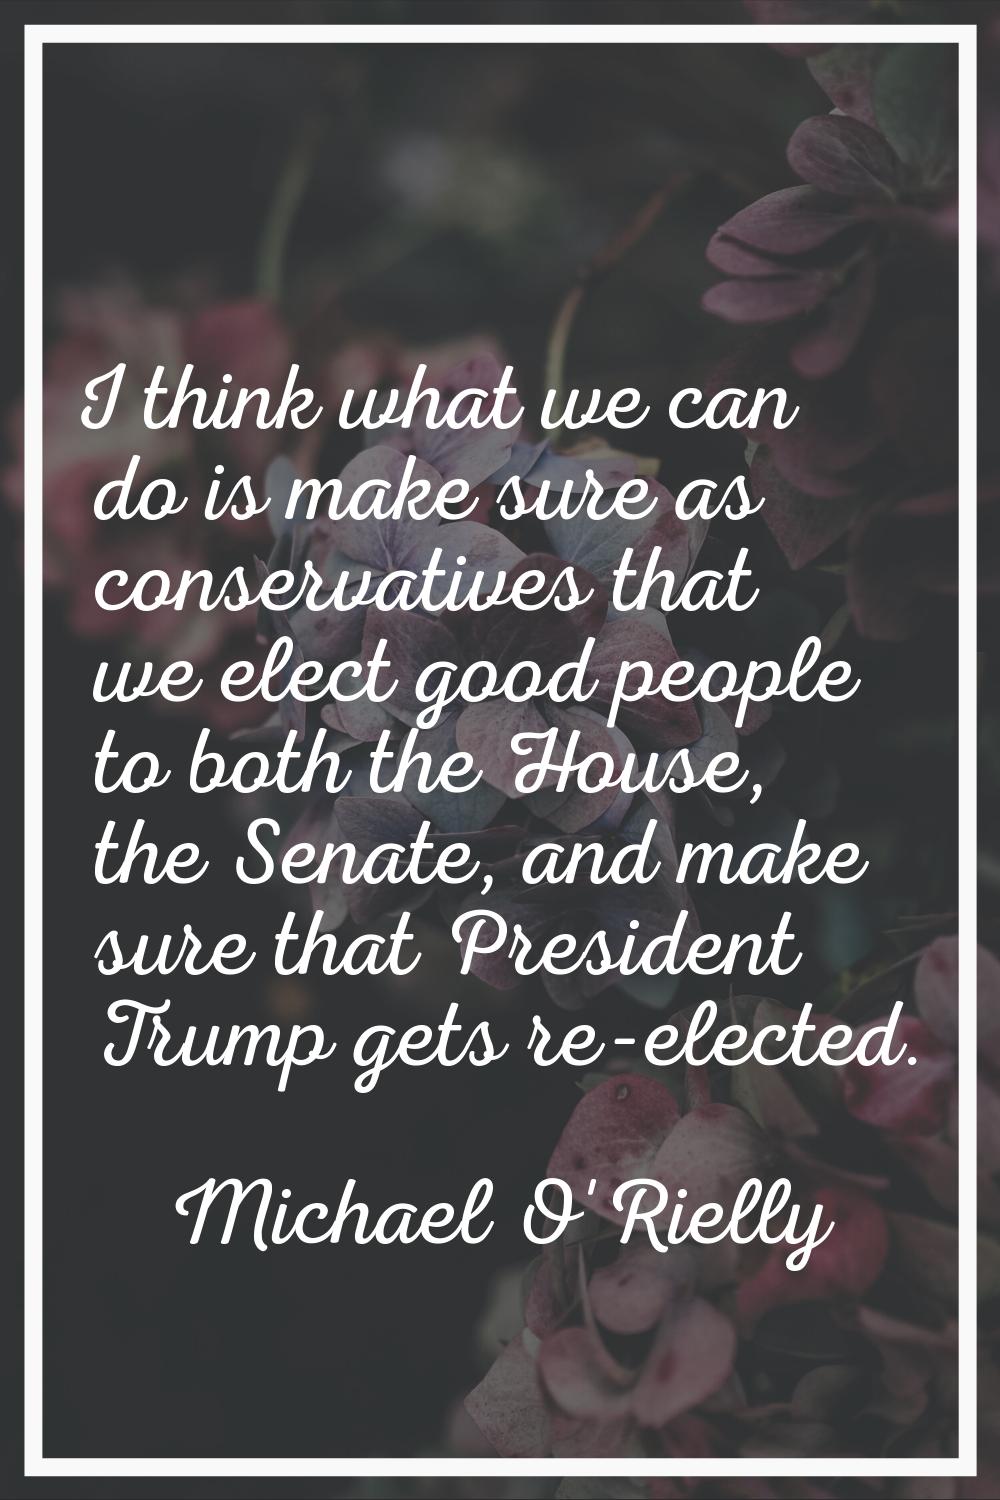 I think what we can do is make sure as conservatives that we elect good people to both the House, t